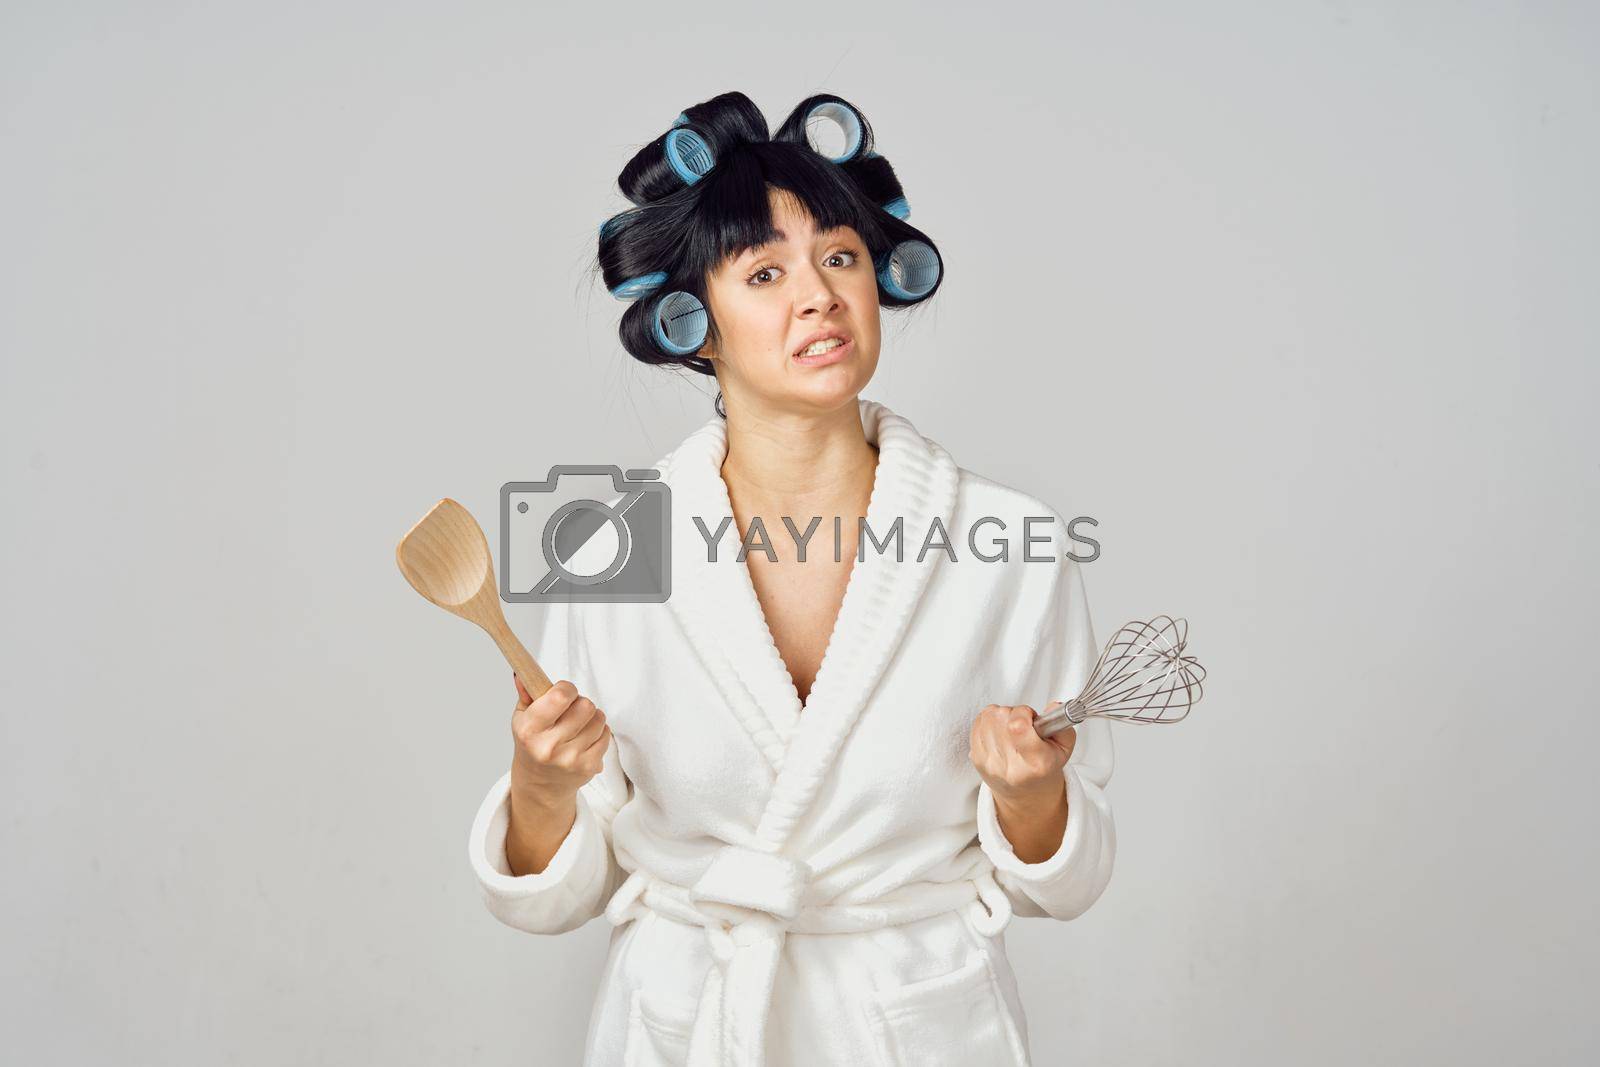 Royalty free image of housewife in white robe kitchenware isolated background by Vichizh